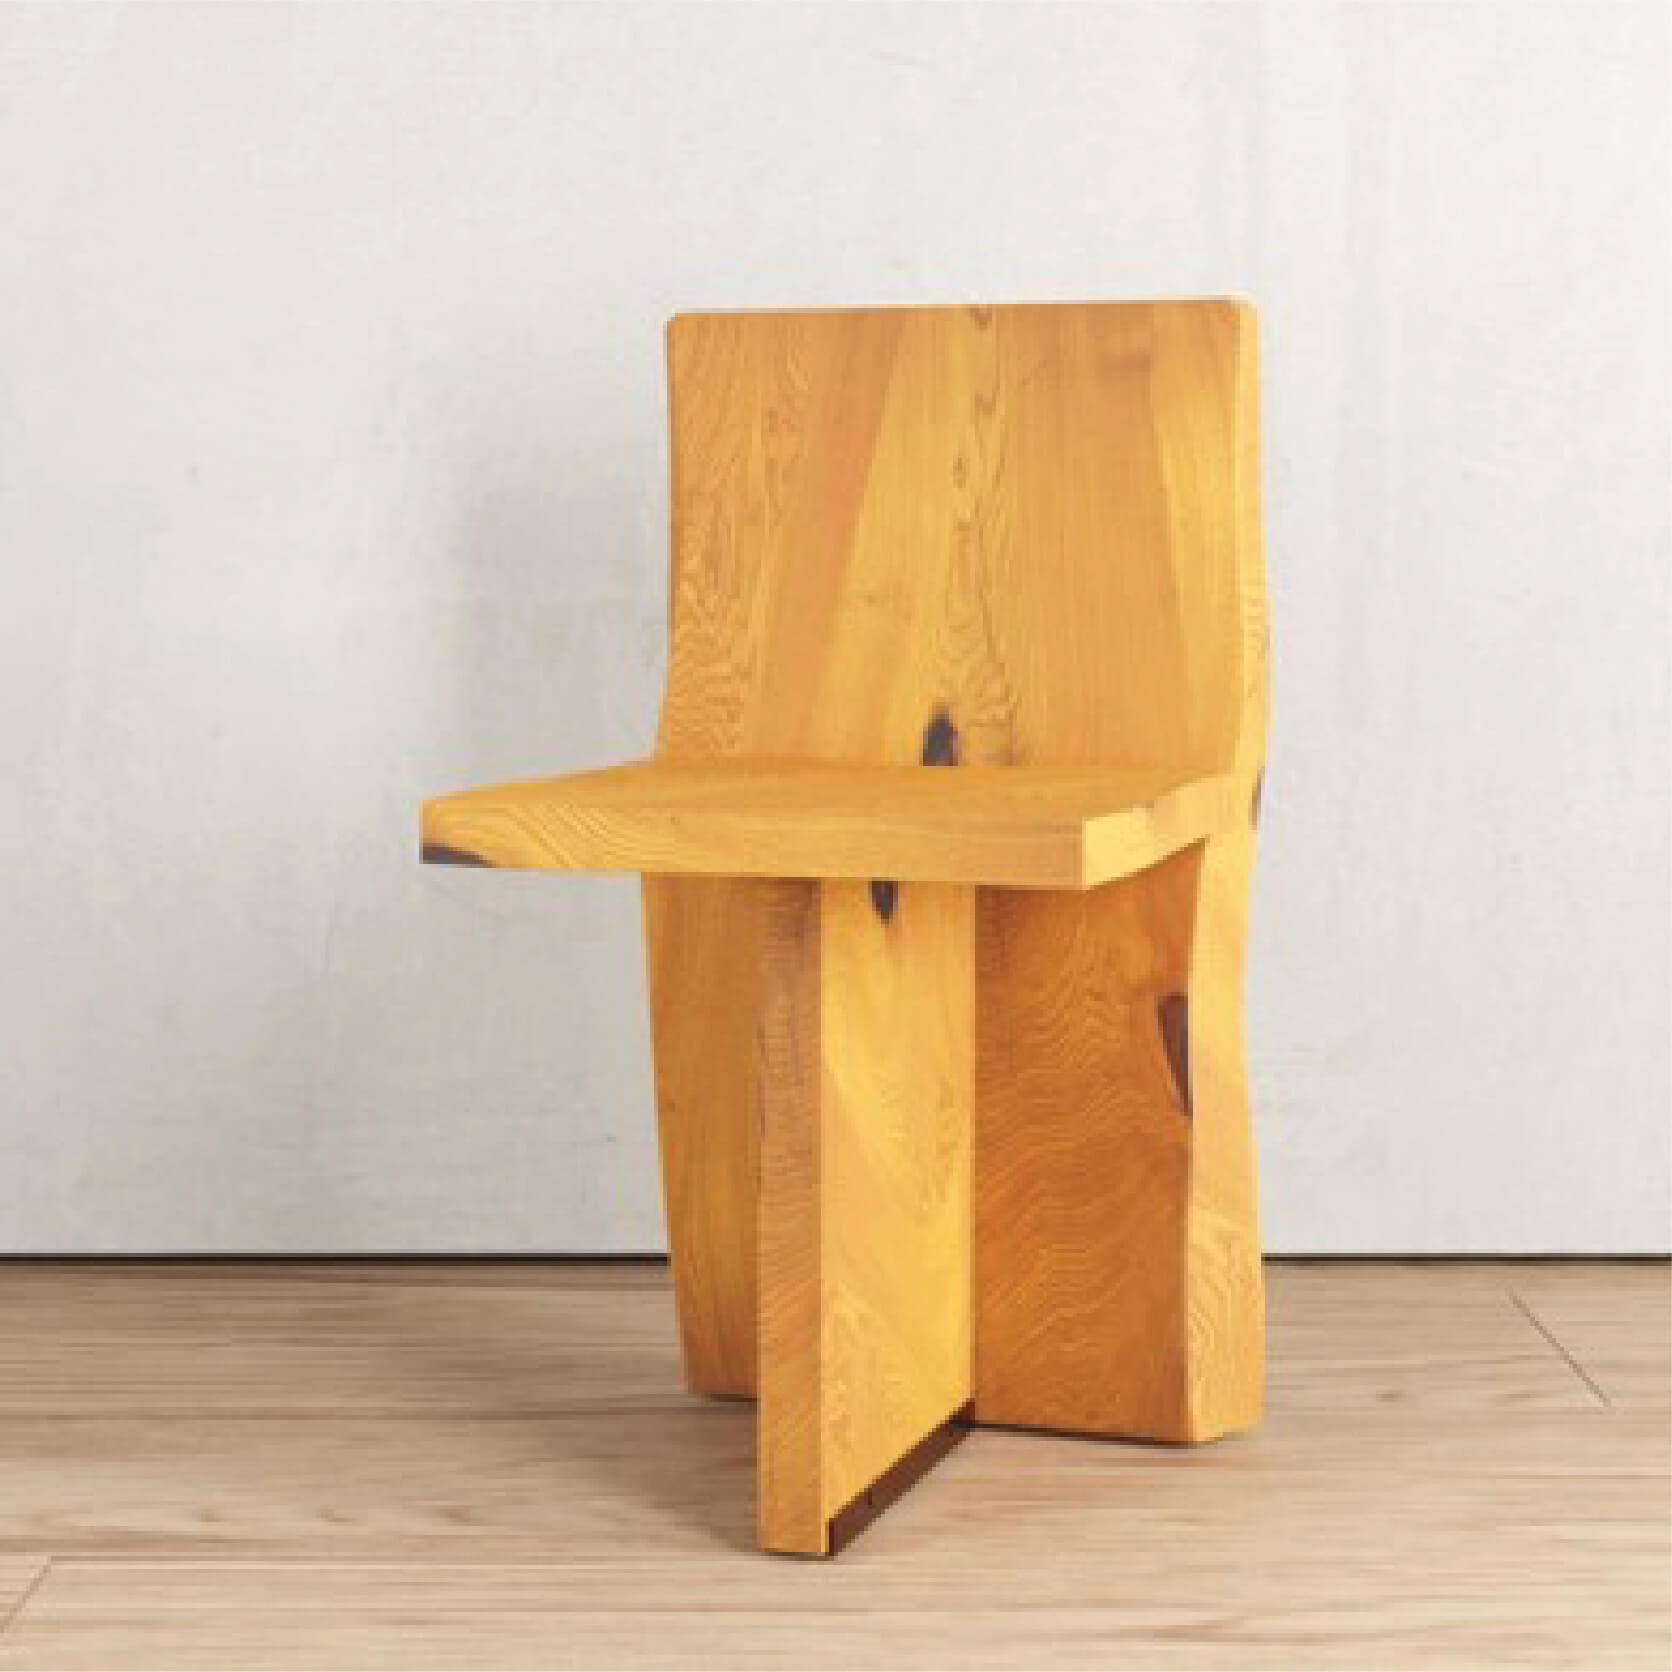 WOOD CHAIR by Acento Colleccions, Inc. - Design Commune Feature